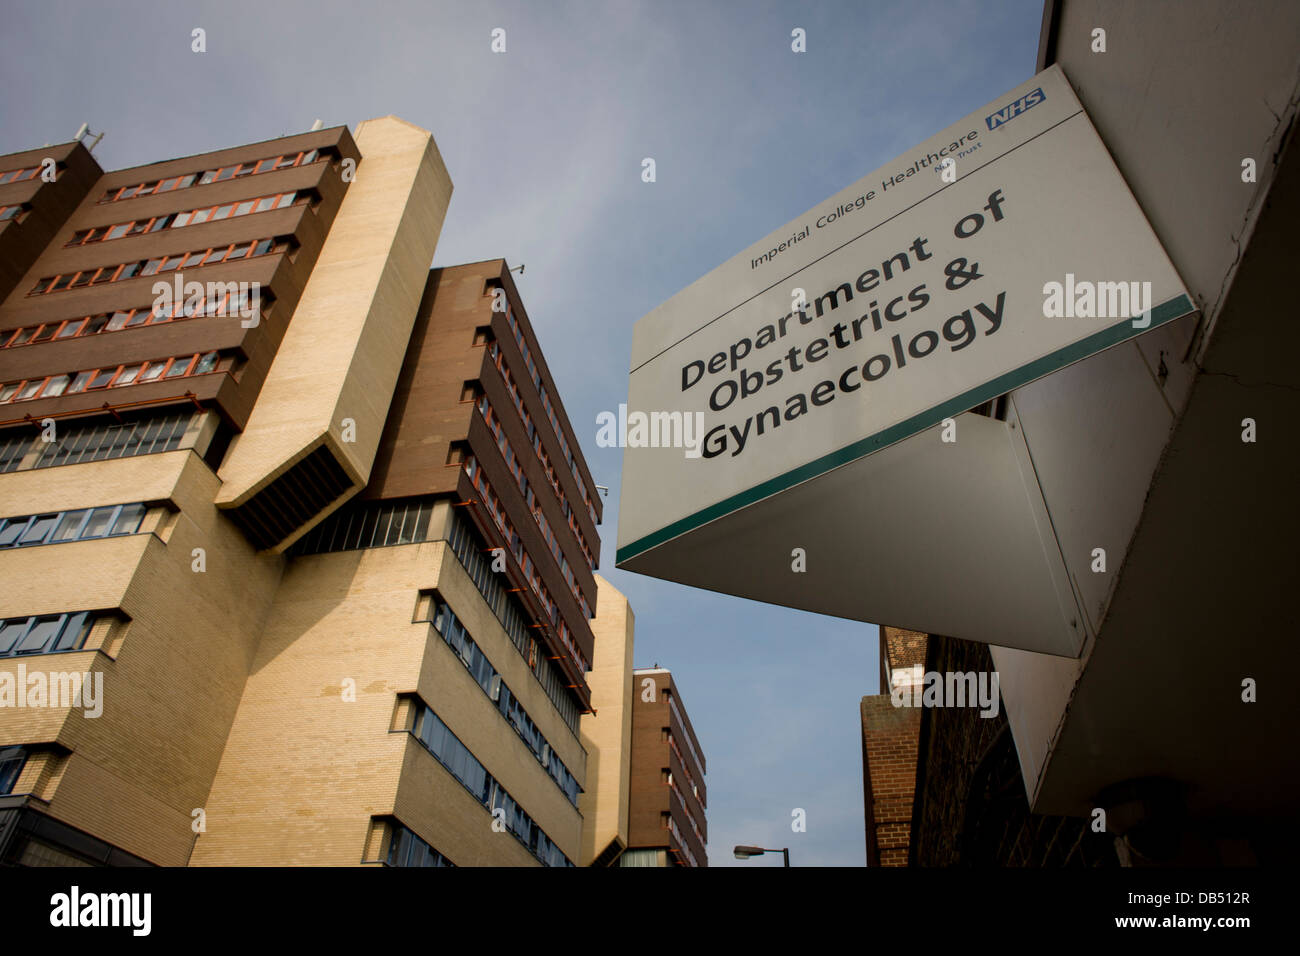 St Mary's hospital NHS trust building complex in Paddington, London. Stock Photo